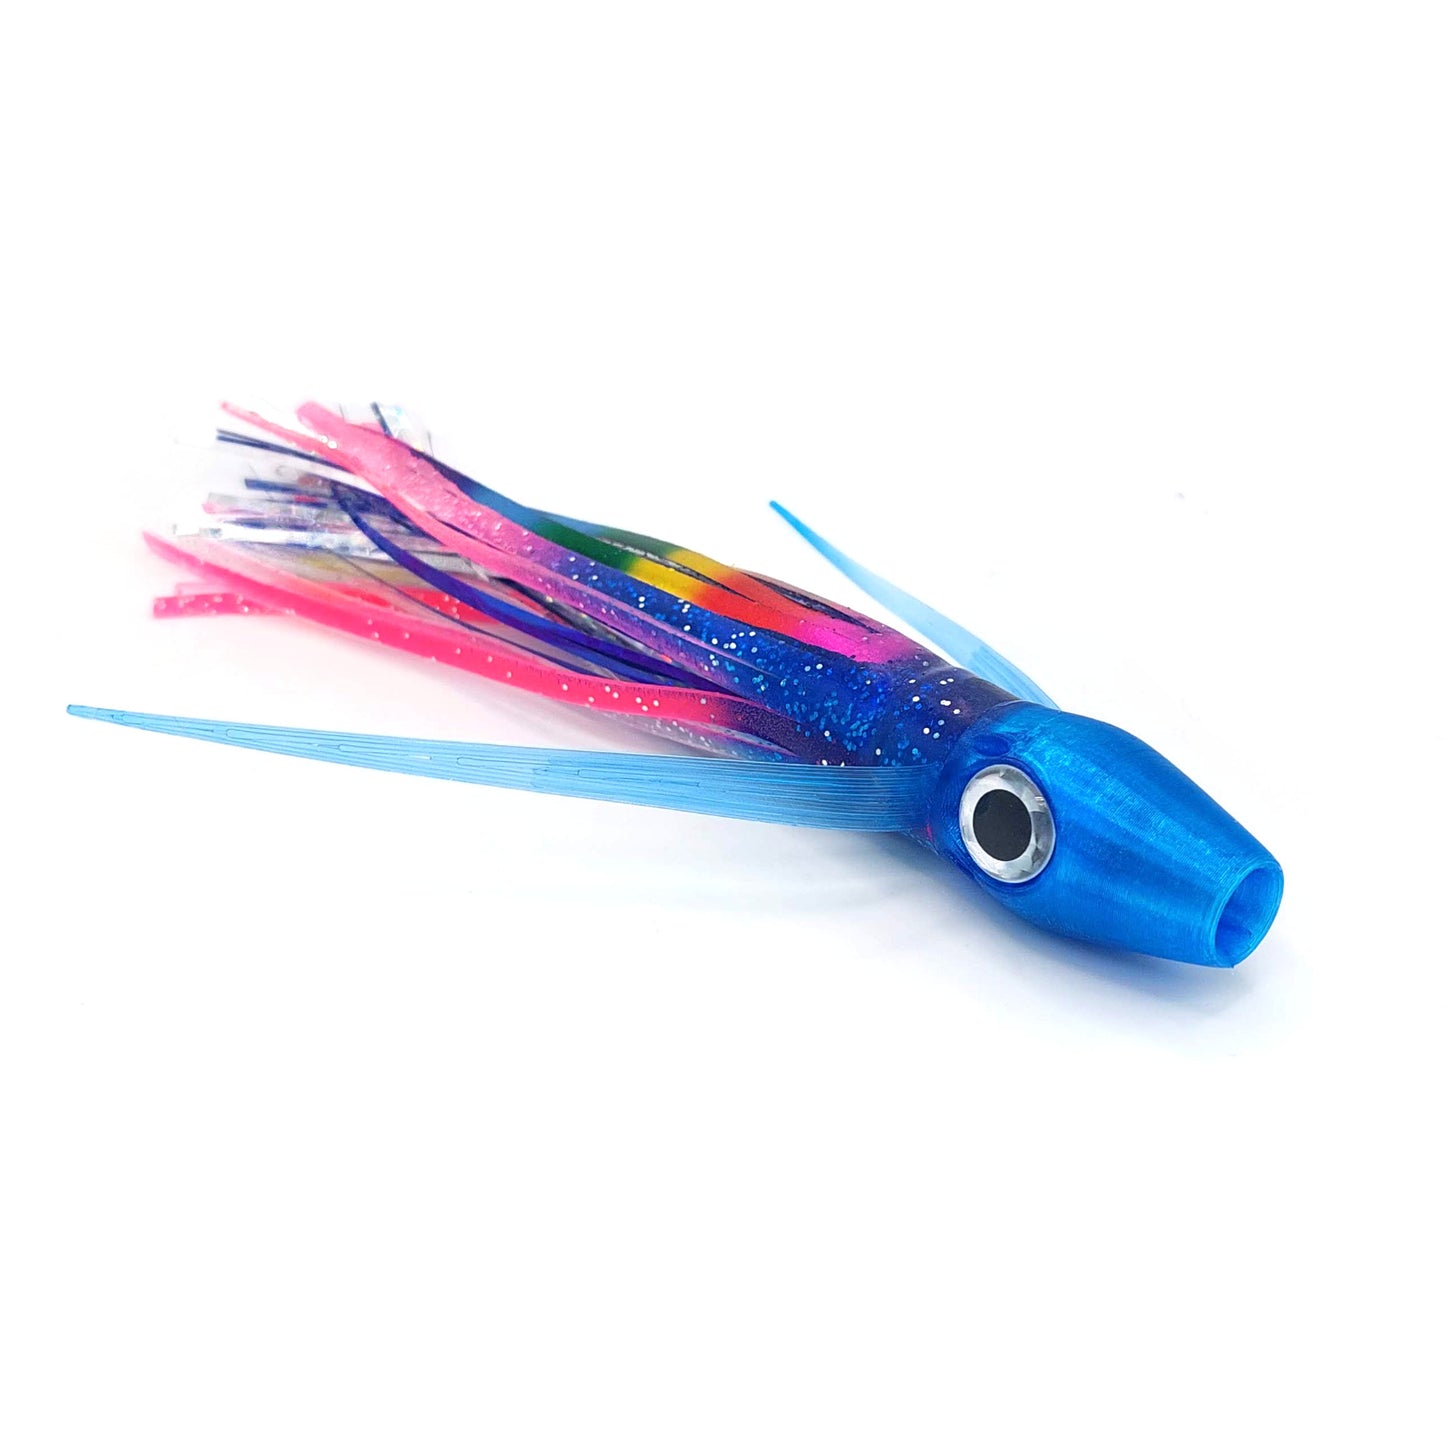 Trolling Lure - Pink & Blue Monkalur for Offshore Fishing